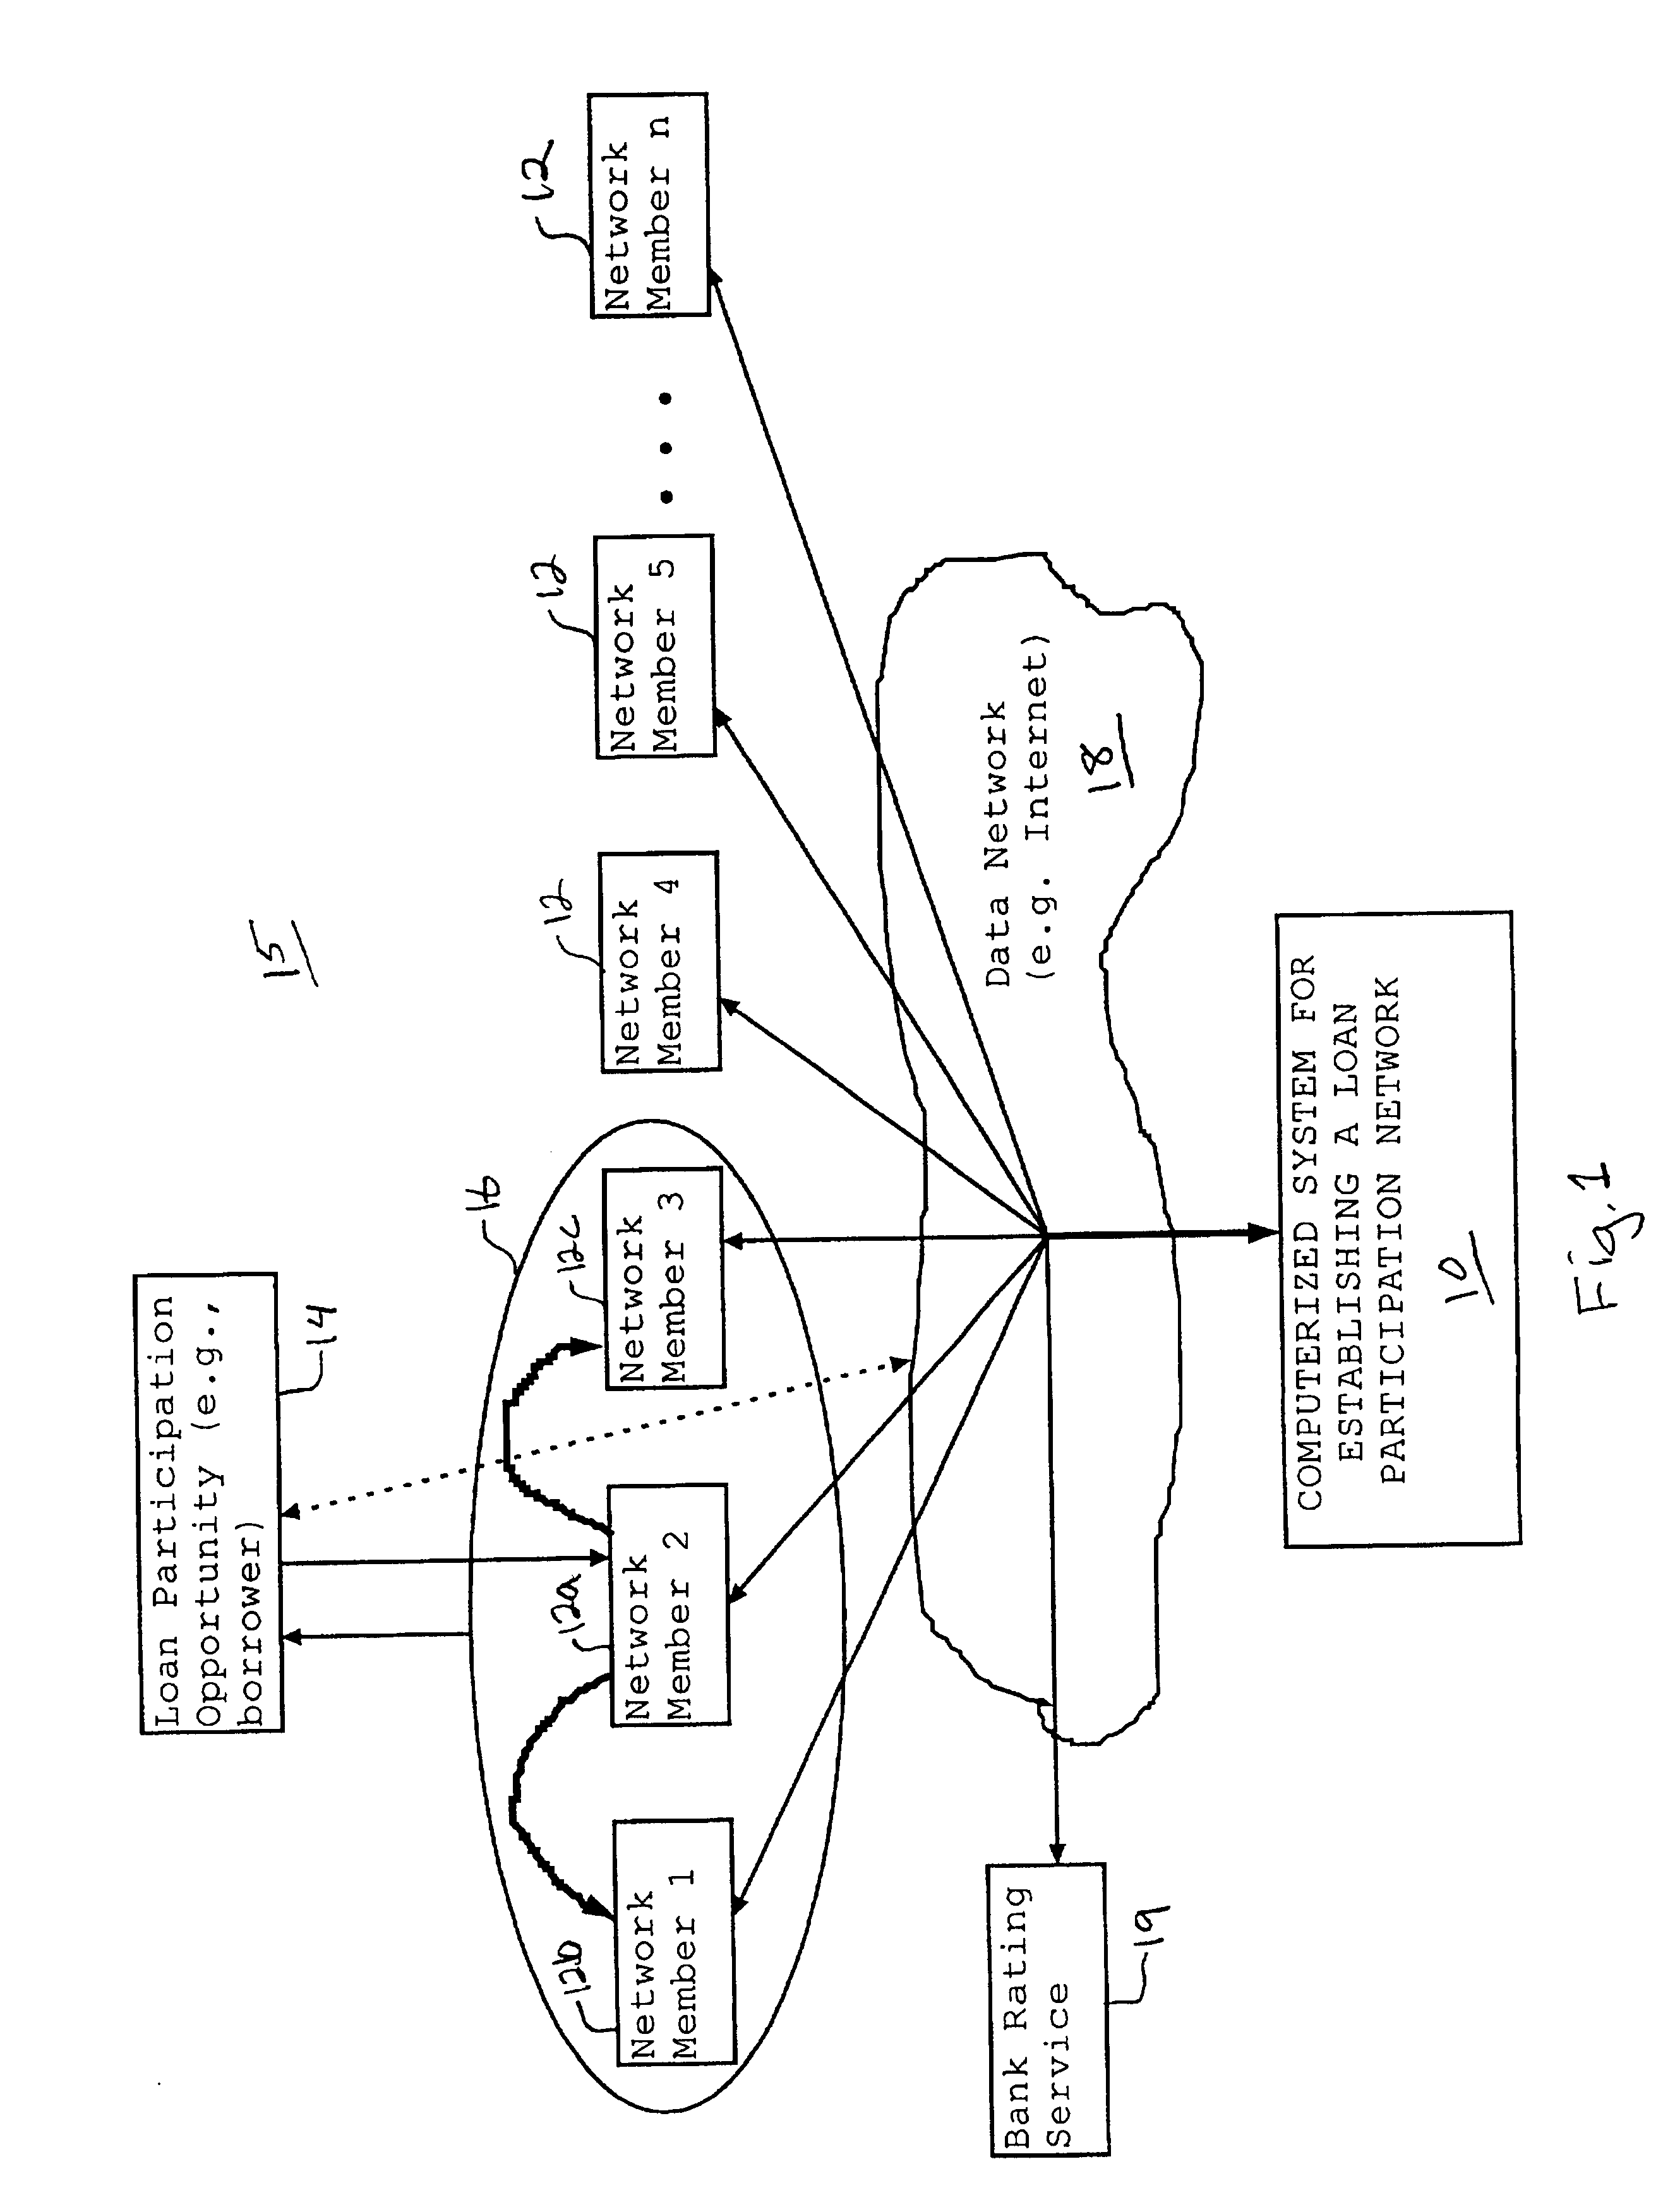 Computerized system and method for establishing a loan participation network